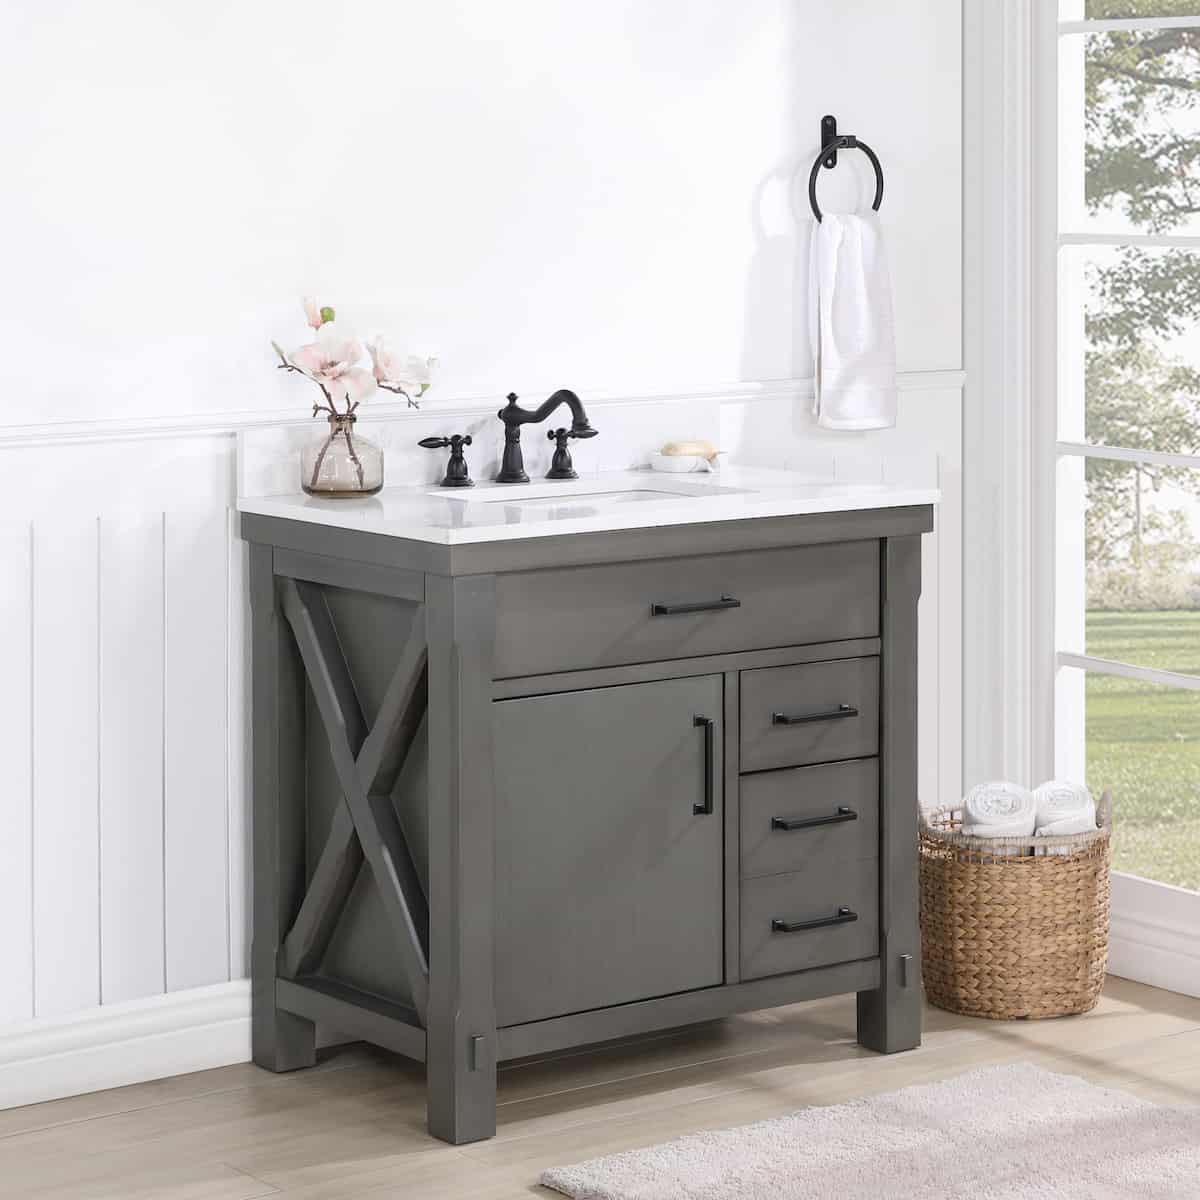 Vinnova Viella 36 Inch Freestanding Single Sink Bath Vanity in Rust Grey Finish with White Composite Countertop Without Mirror Side 701836-RU-WS-NM